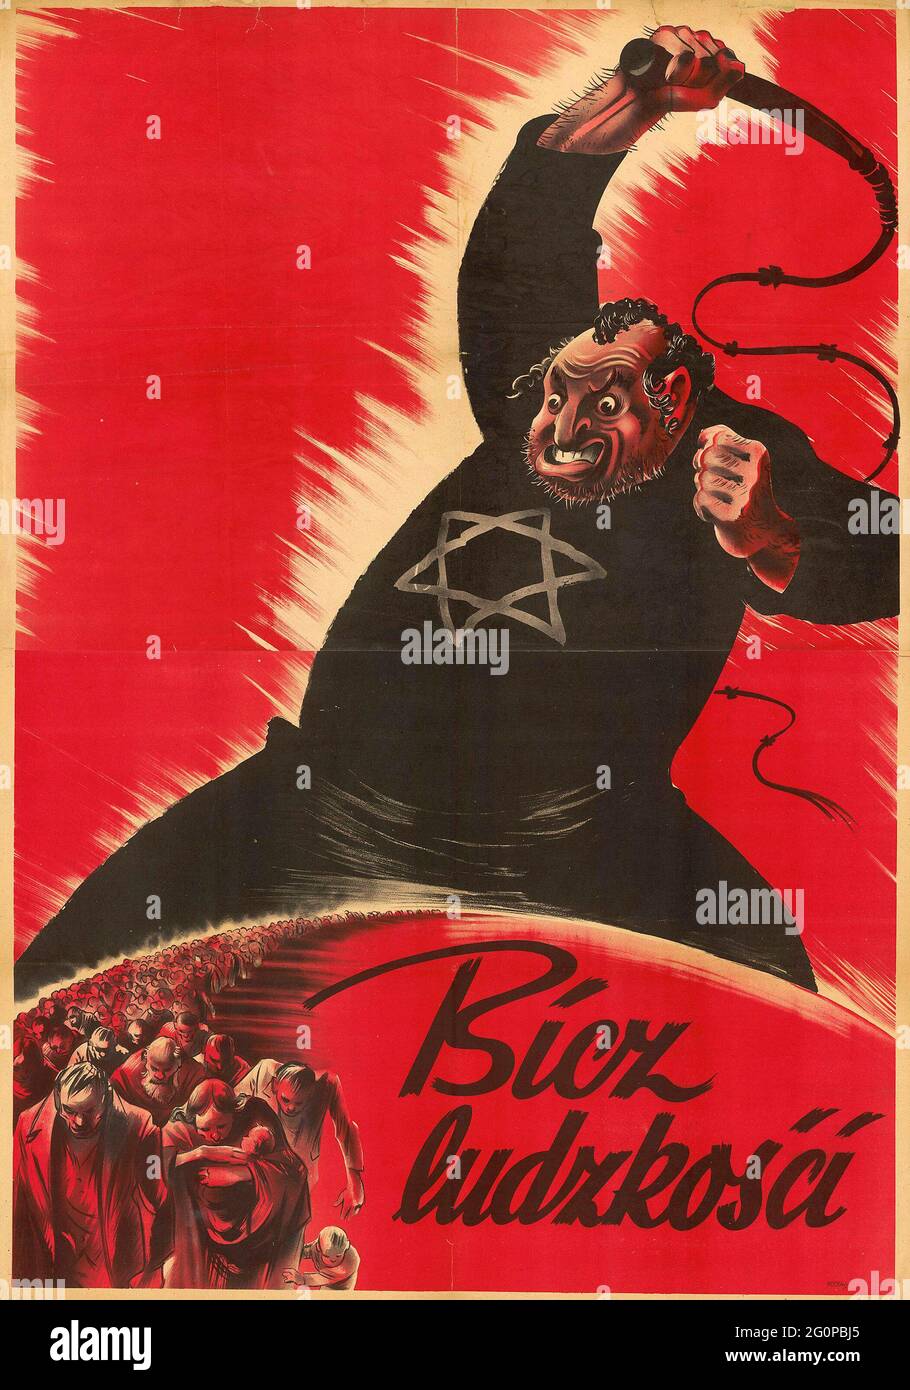 A vintage Nazi propaganda poster from occupied Poland showing a bestial Jew  whipping fleeing people with the slogan "The Whip of Humanity Stock Photo -  Alamy